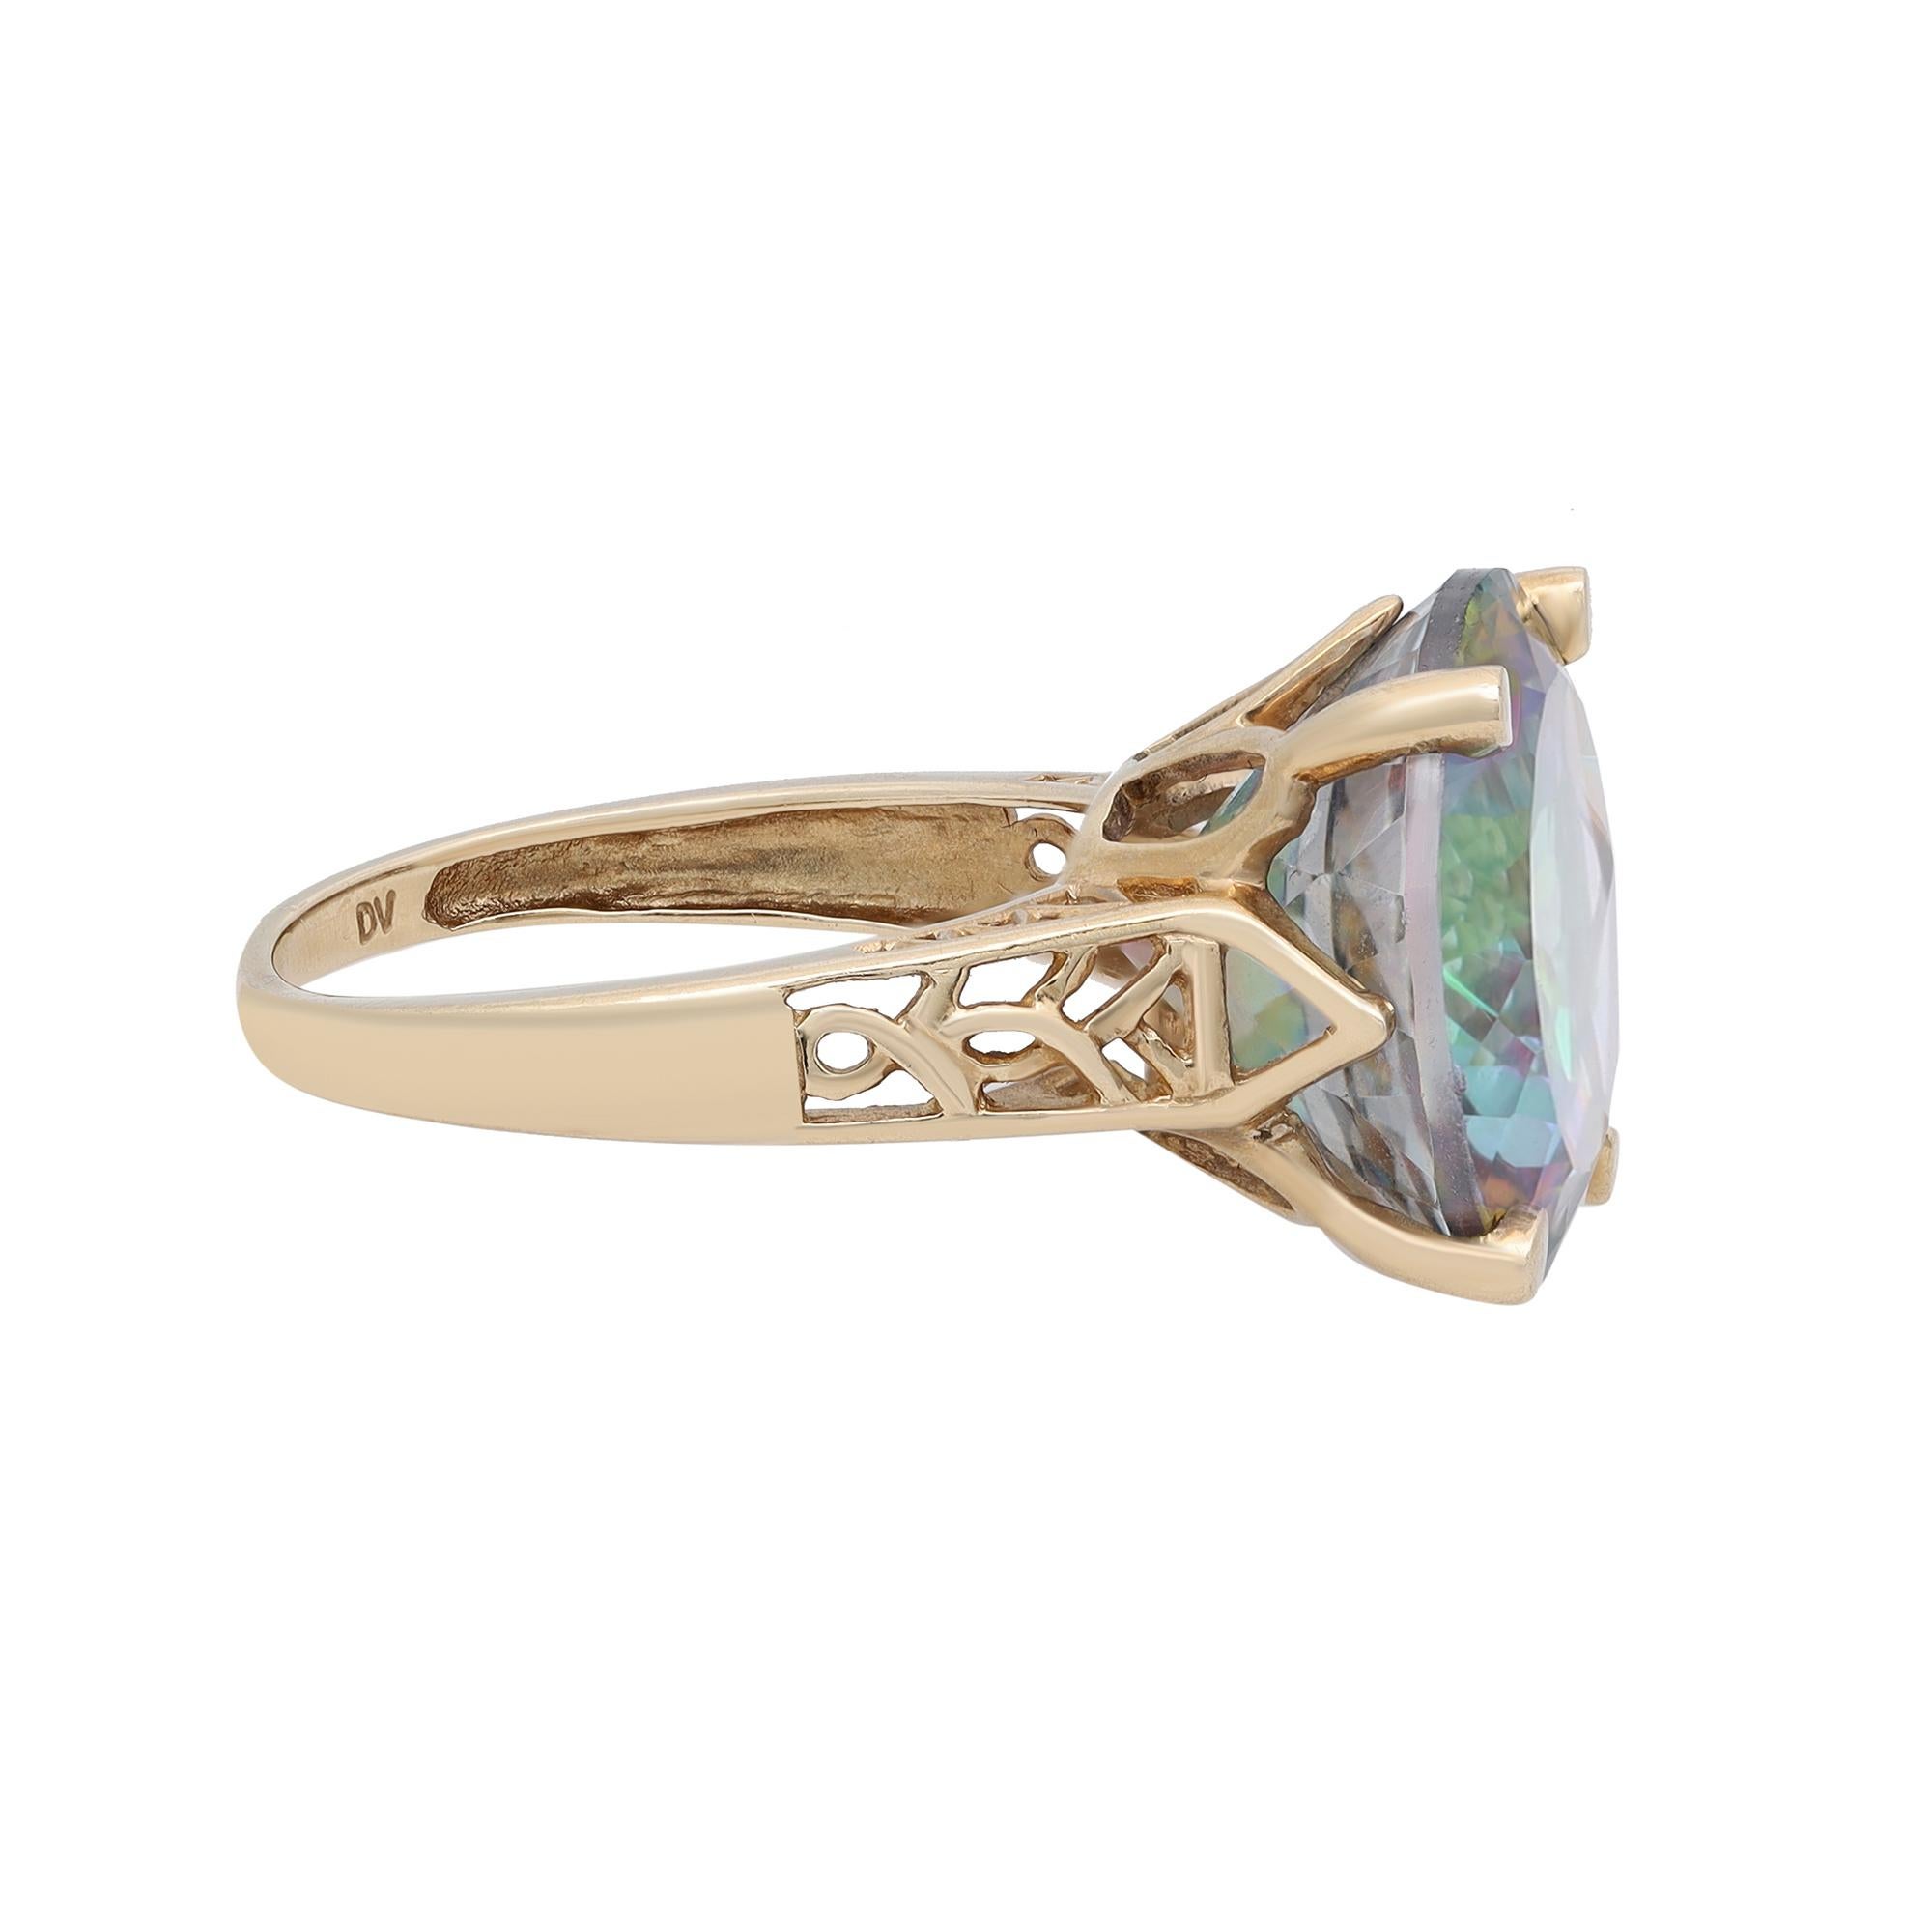 This lovely ring features a prong set round shape mystic rainbow Topaz set in a 10k yellow gold band with a filigree mounting design visible from the sides. It would make a beautiful promise ring, a unique engagement ring, or a wonderful gift for